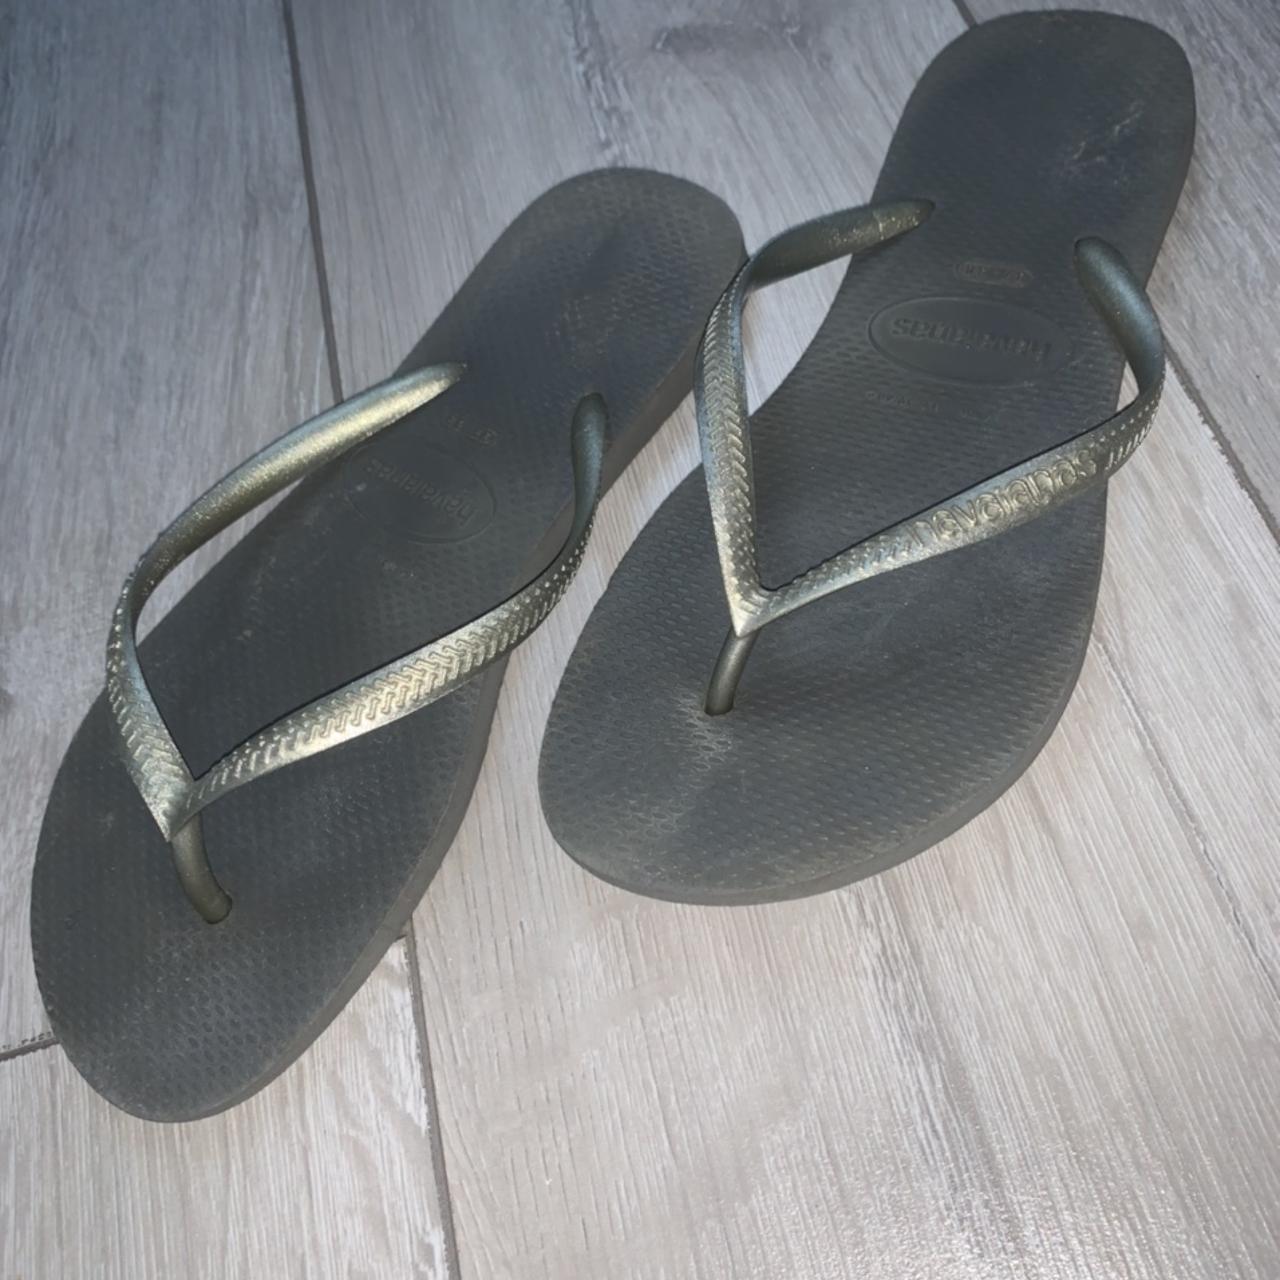 Havaianas Women's Silver and Grey Sandals (2)